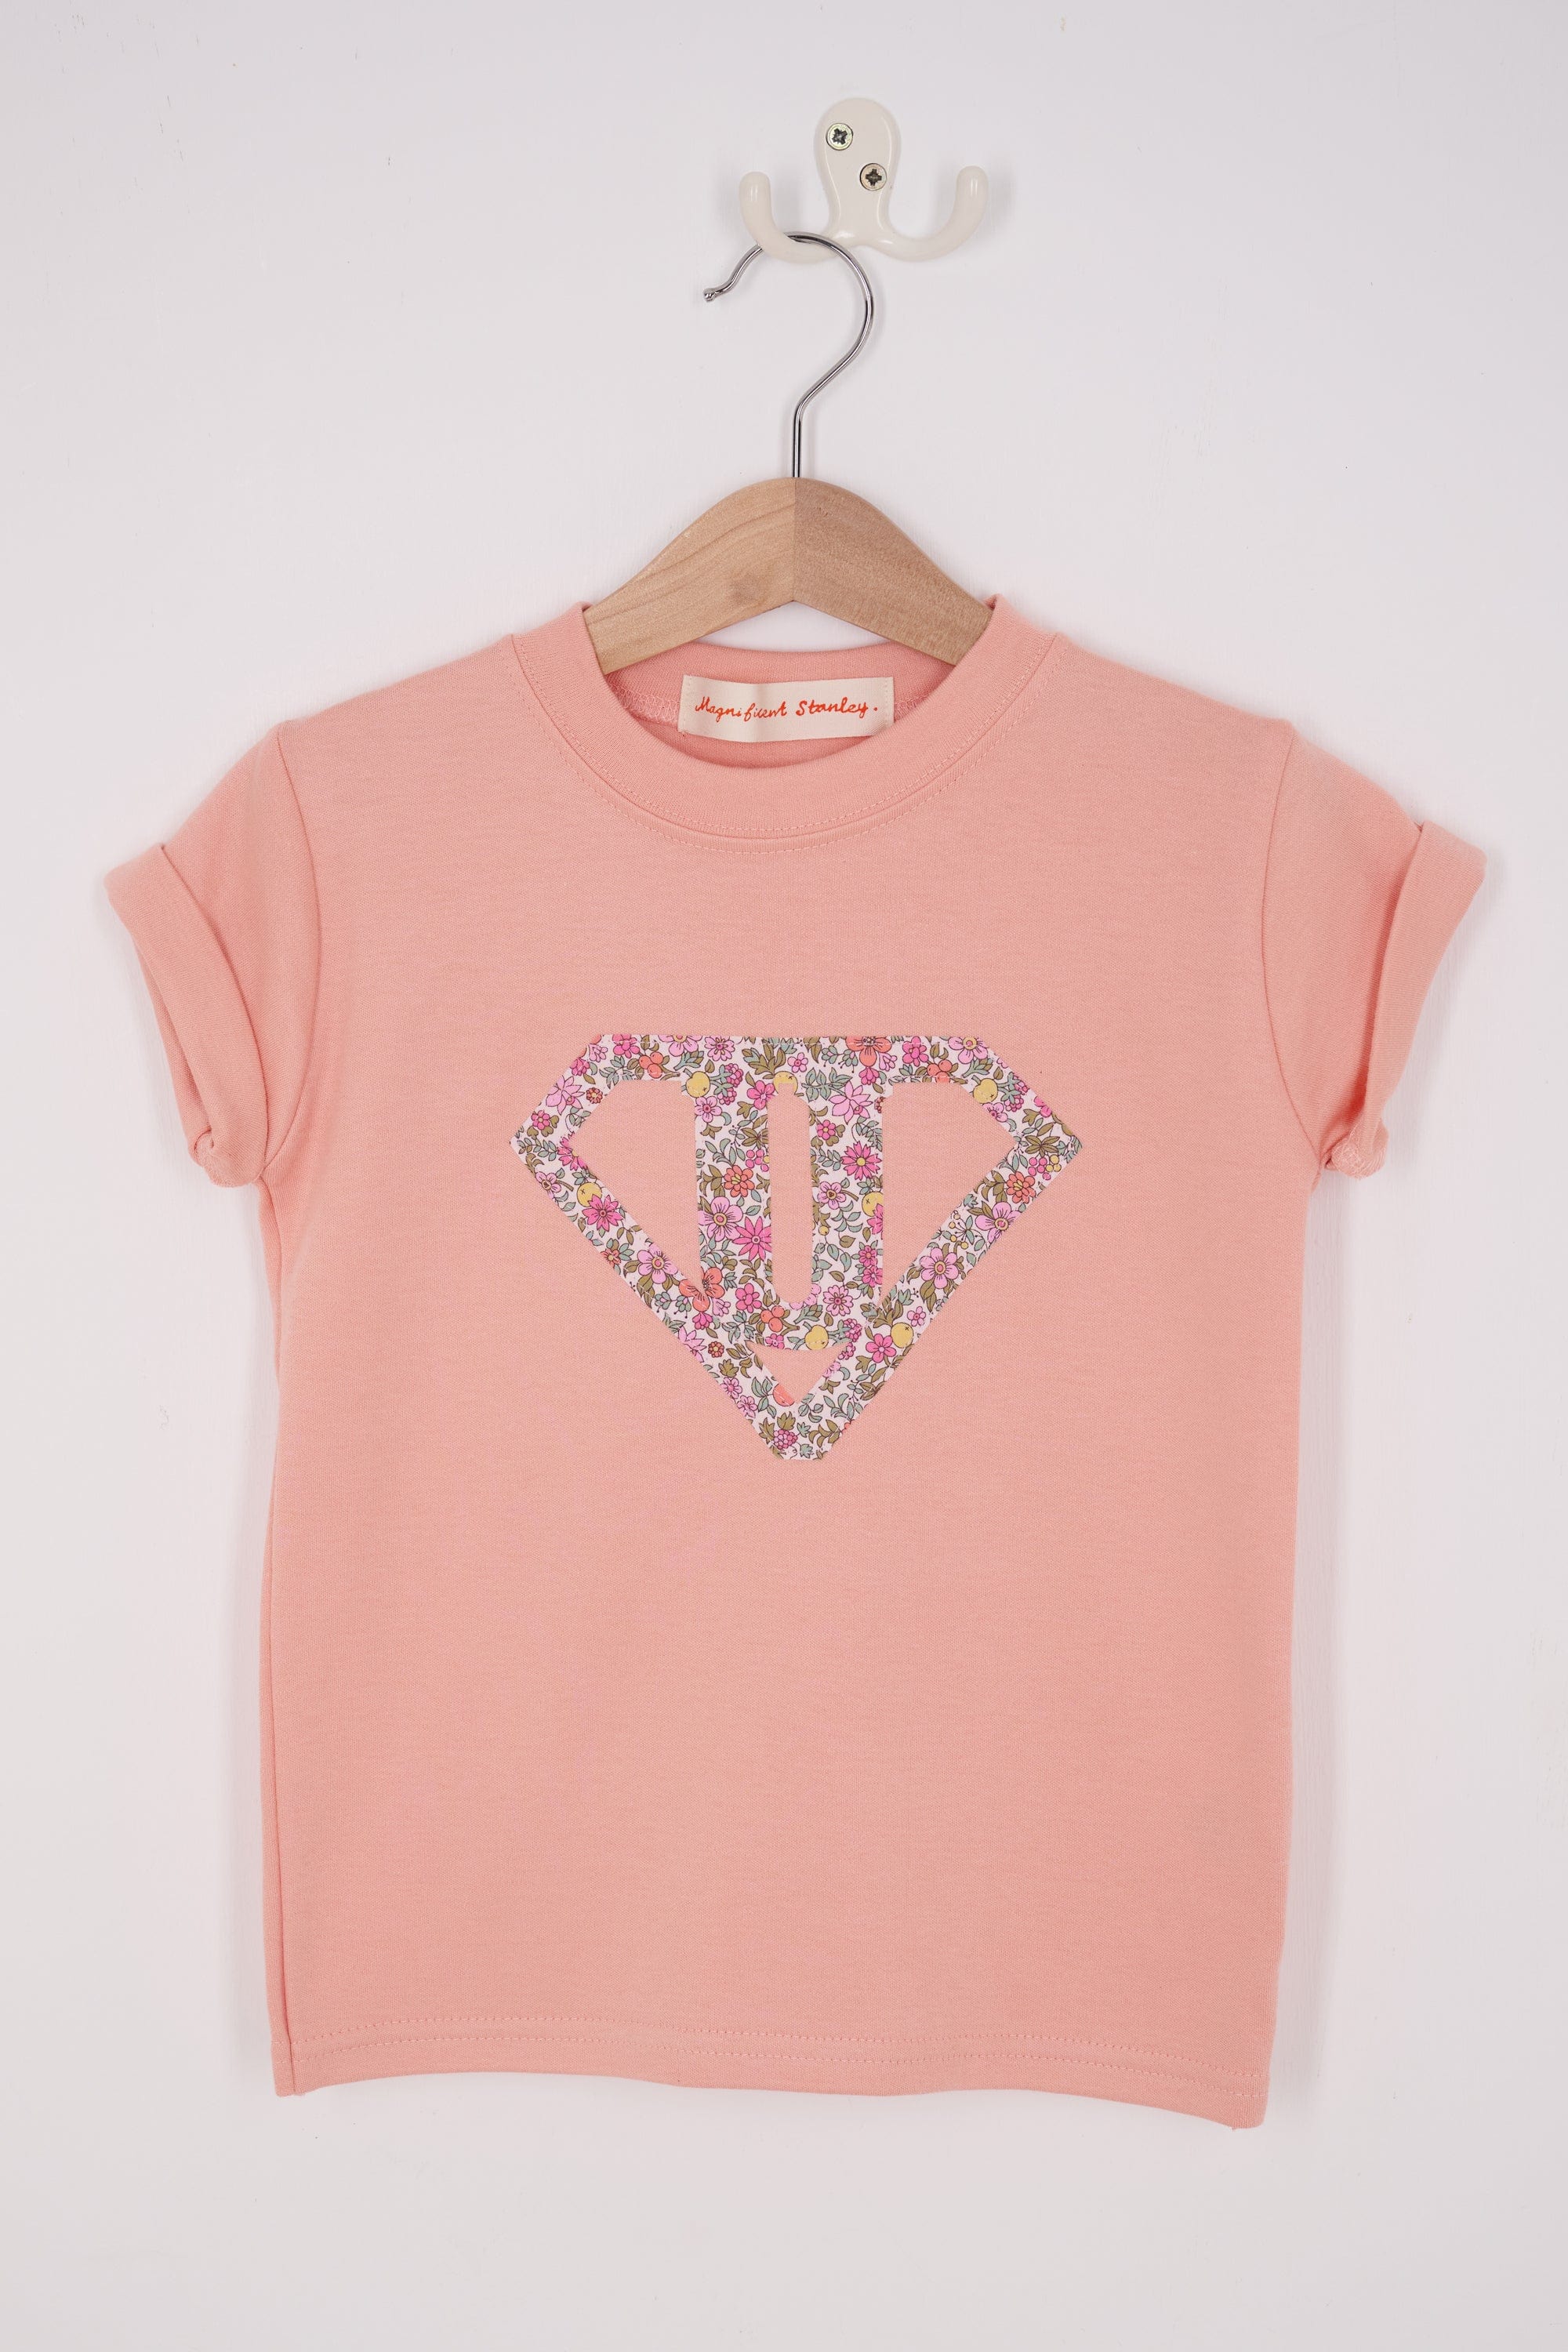 Magnificent Stanley Tee Superhero Dusty Pink T-Shirt in choice of Liberty Print